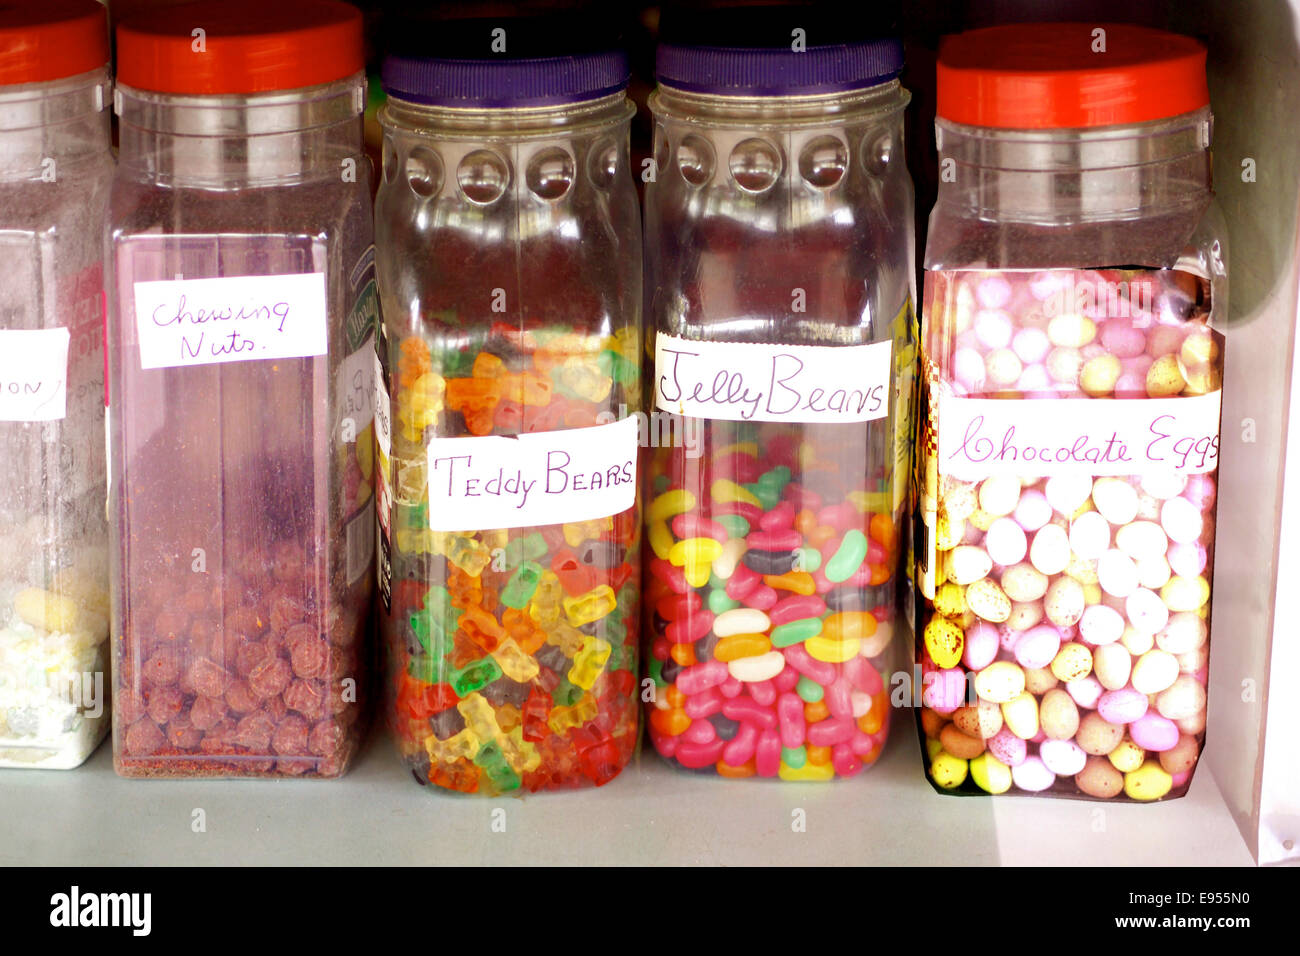 Candy jars with various sweets, display in a candy store, Dublin, Republic  of Ireland Stock Photo - Alamy